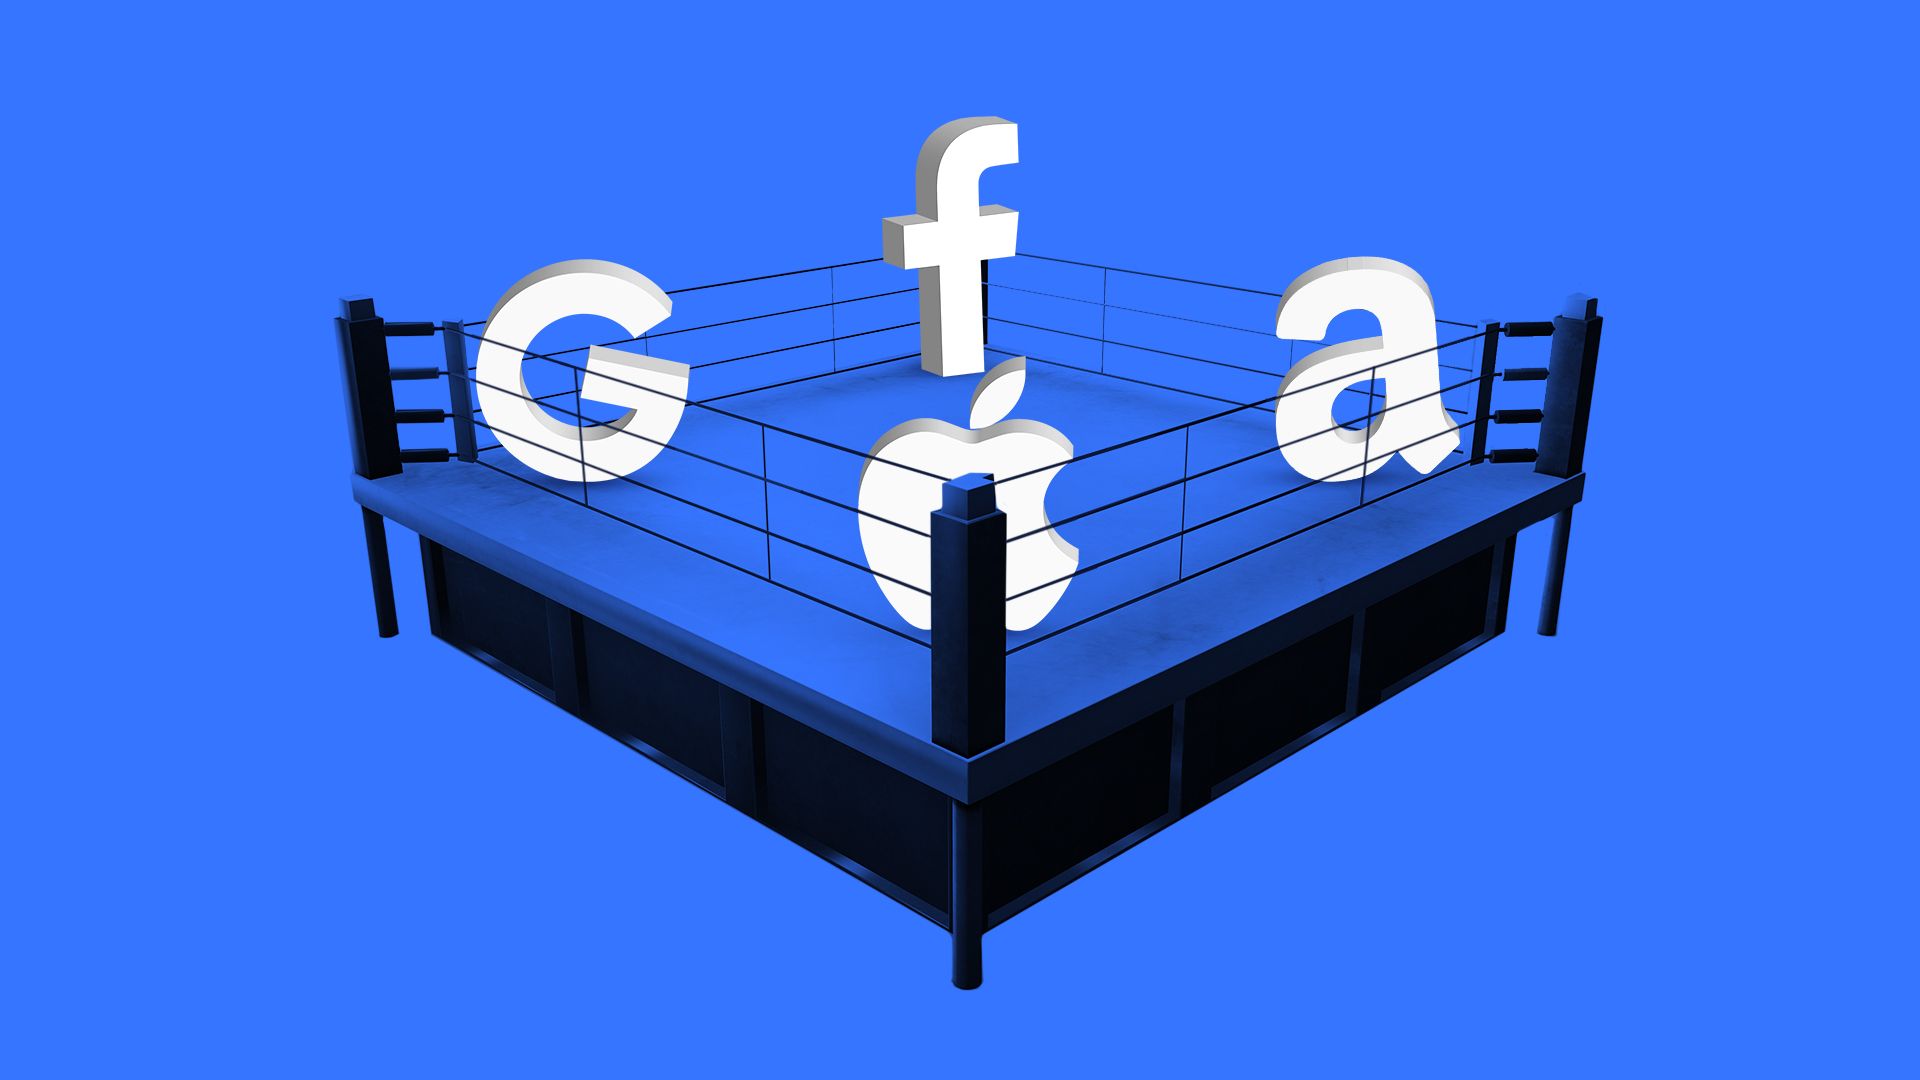 An illustration of the Google, Apple, Facebook and Amazon logos in a wrestling ring